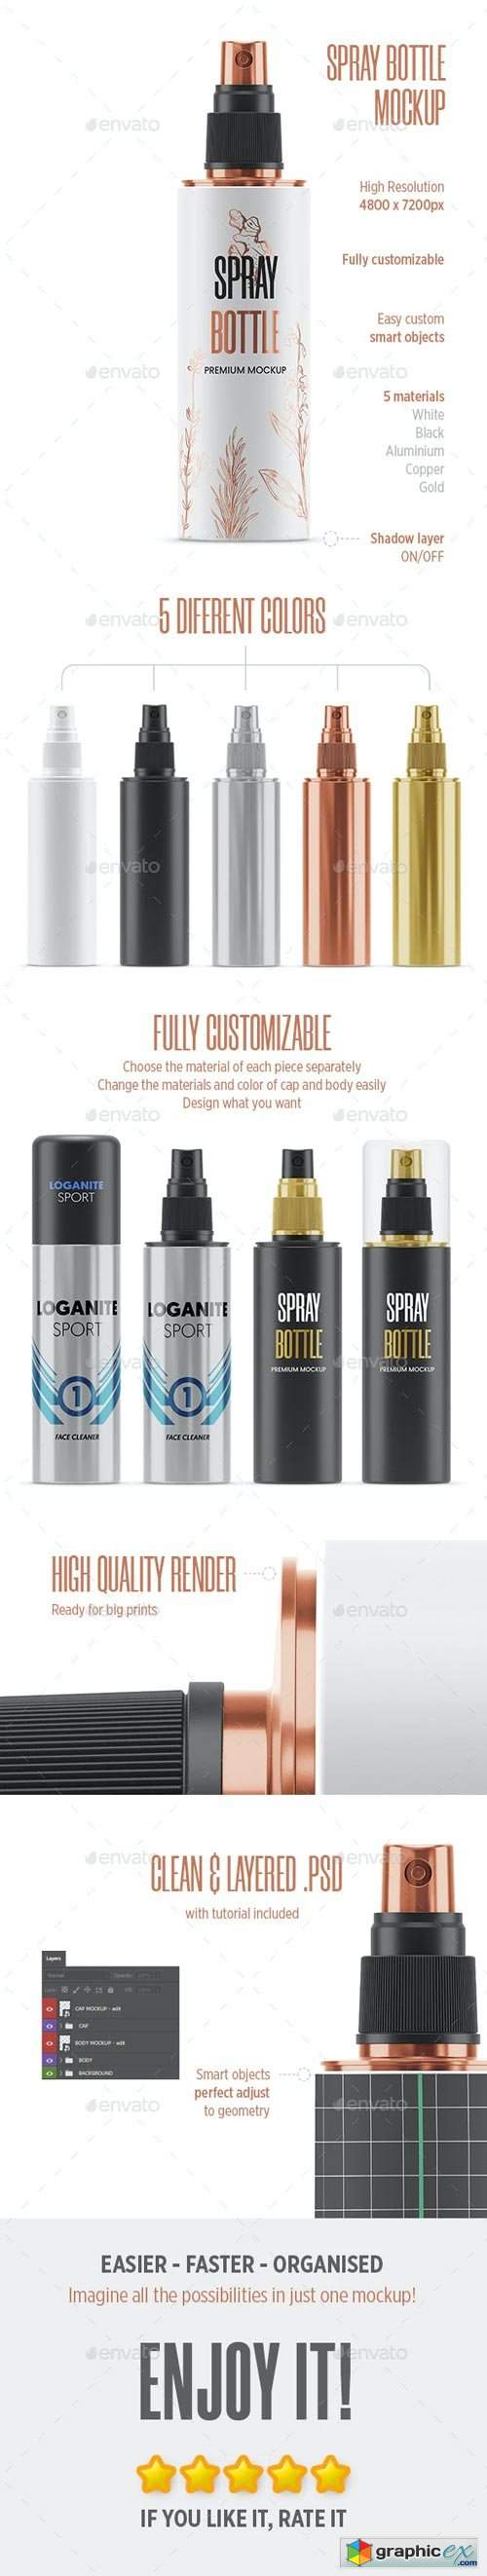 Download Spray Bottle MockUp - 29417382 » Free Download Vector Stock Image Photoshop Icon